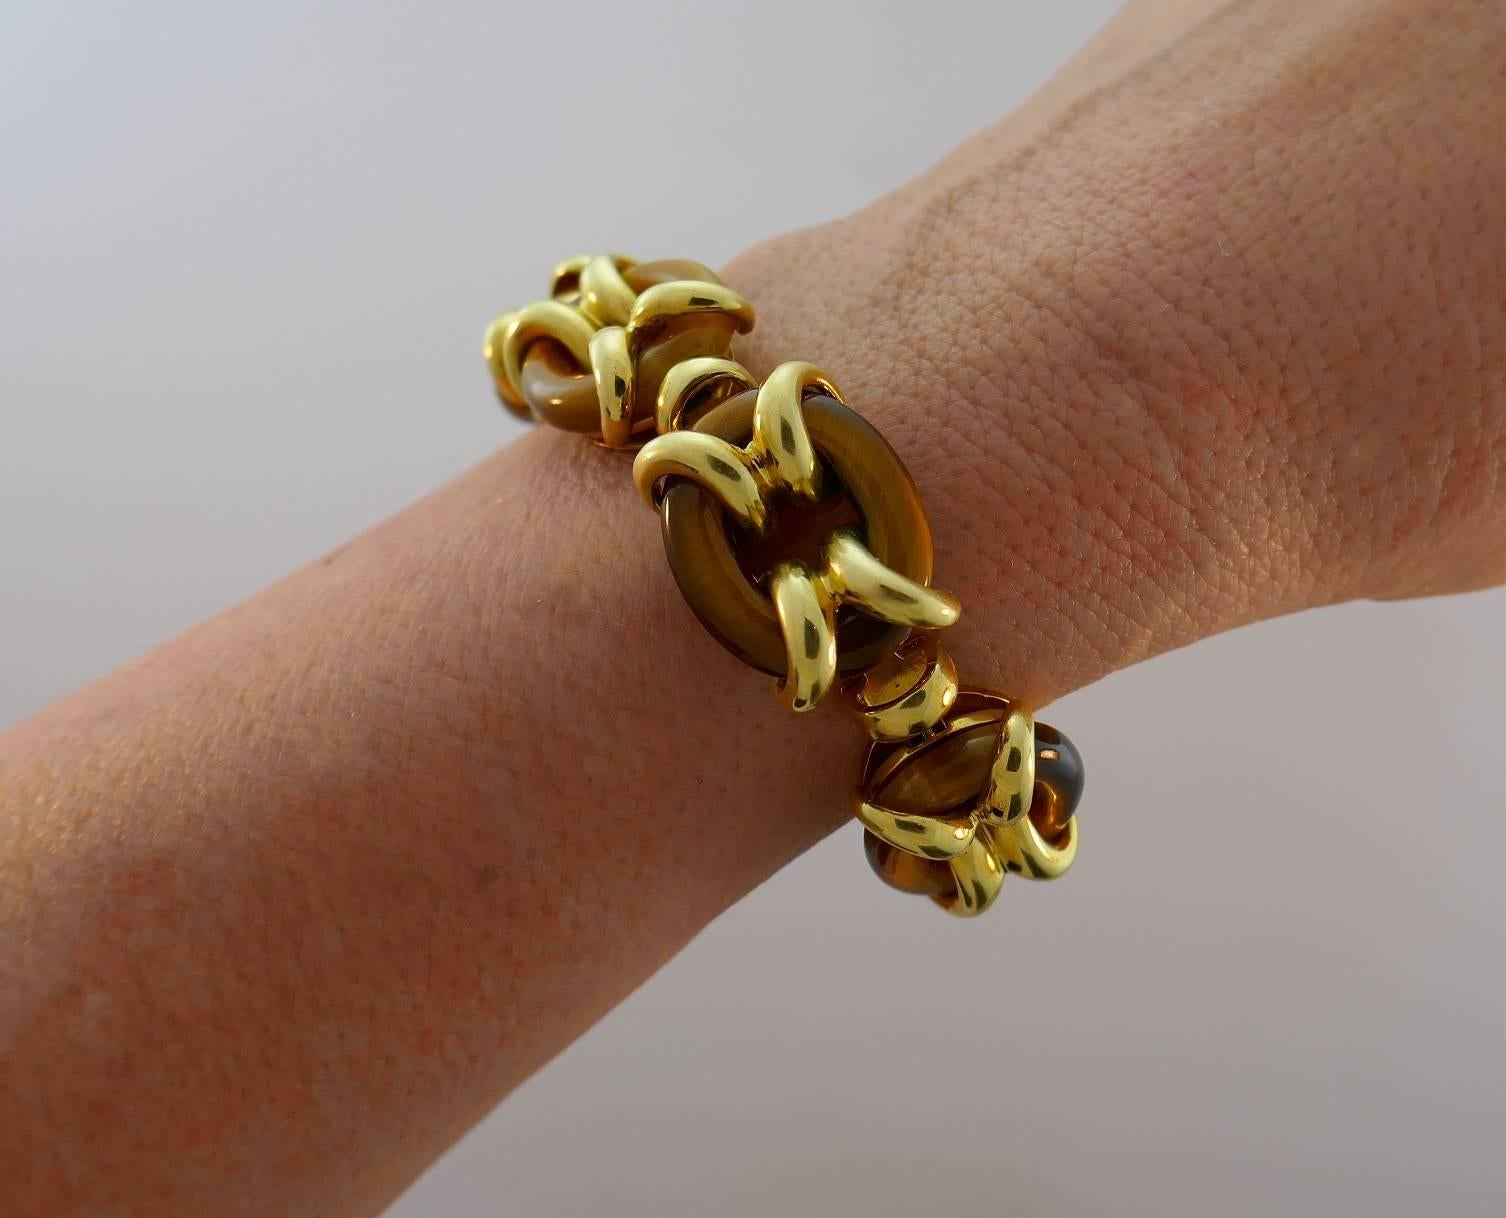 Bold yet elegant bracelet created by Cartier in 1970s. Stylish and wearable, the bracelet is a great addition to your jewelry collection. 
Made of 18 karat yellow gold and tiger's eye links. 
The bracelet measures 6-5/8 x 3/4 inches (17 x 1.8 cm)